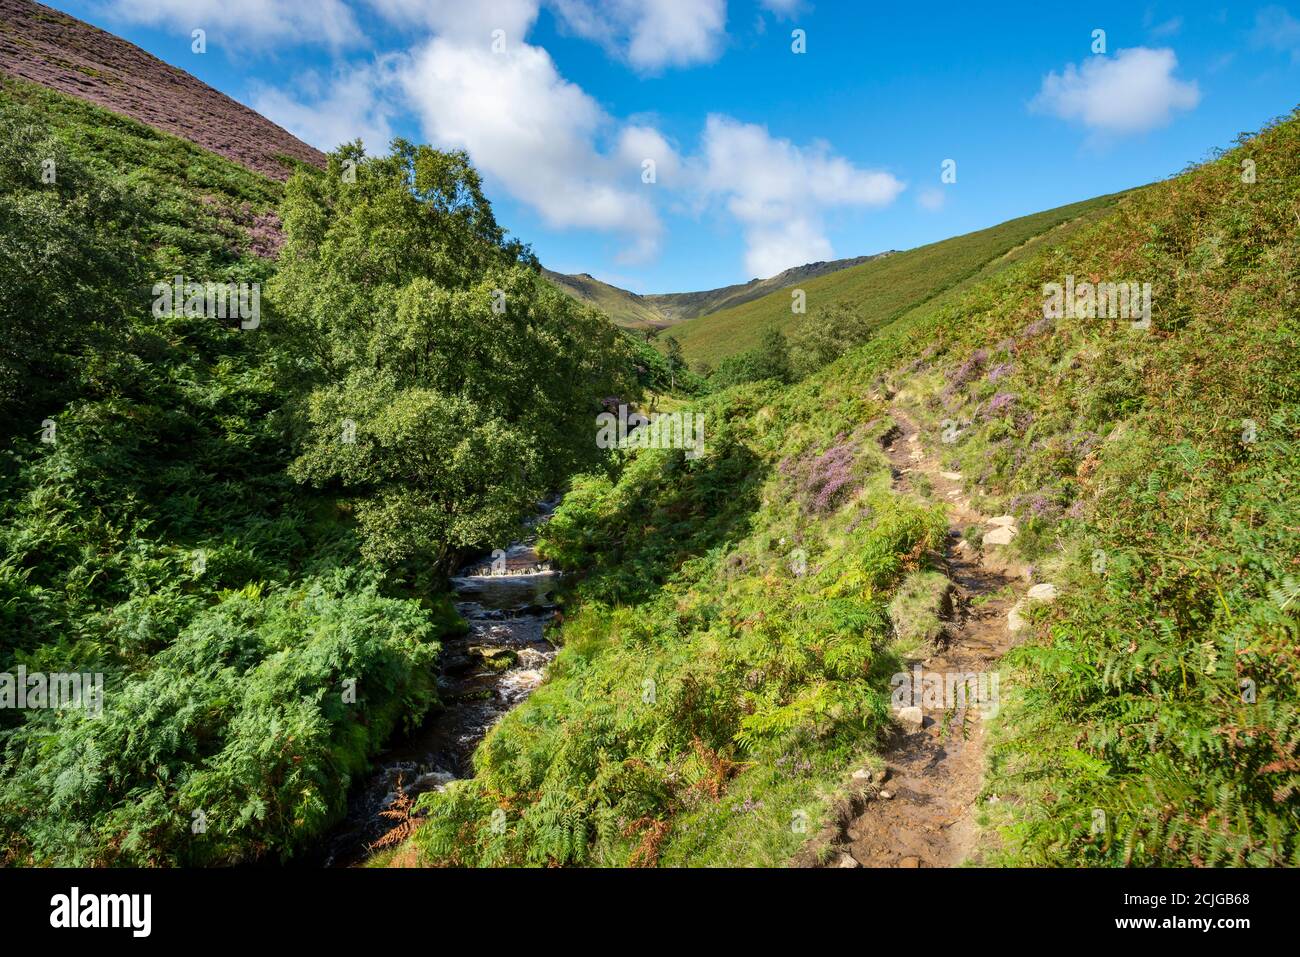 Path along Fairbrook leading up to the northern edge of Kinder Scout, Peak District, Derbyshire, England. Heather in bloom on the moorland slopes. Stock Photo